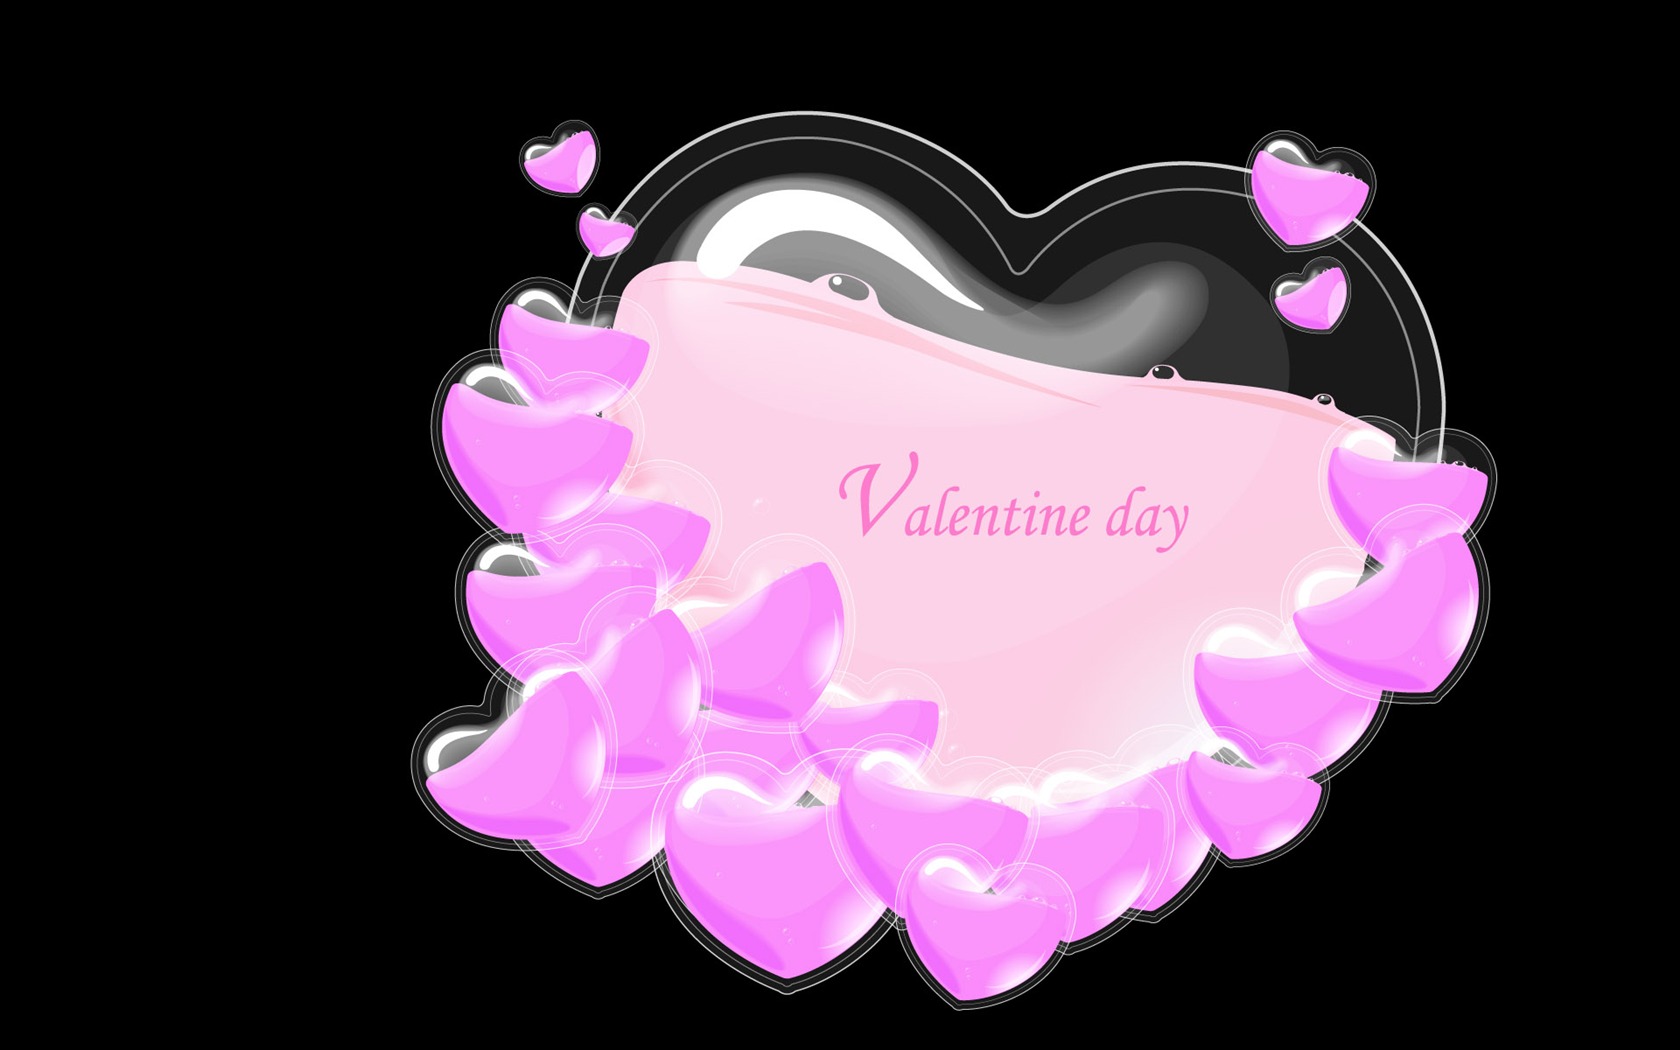 Valentine's Day Theme Wallpapers (2) #8 - 1680x1050